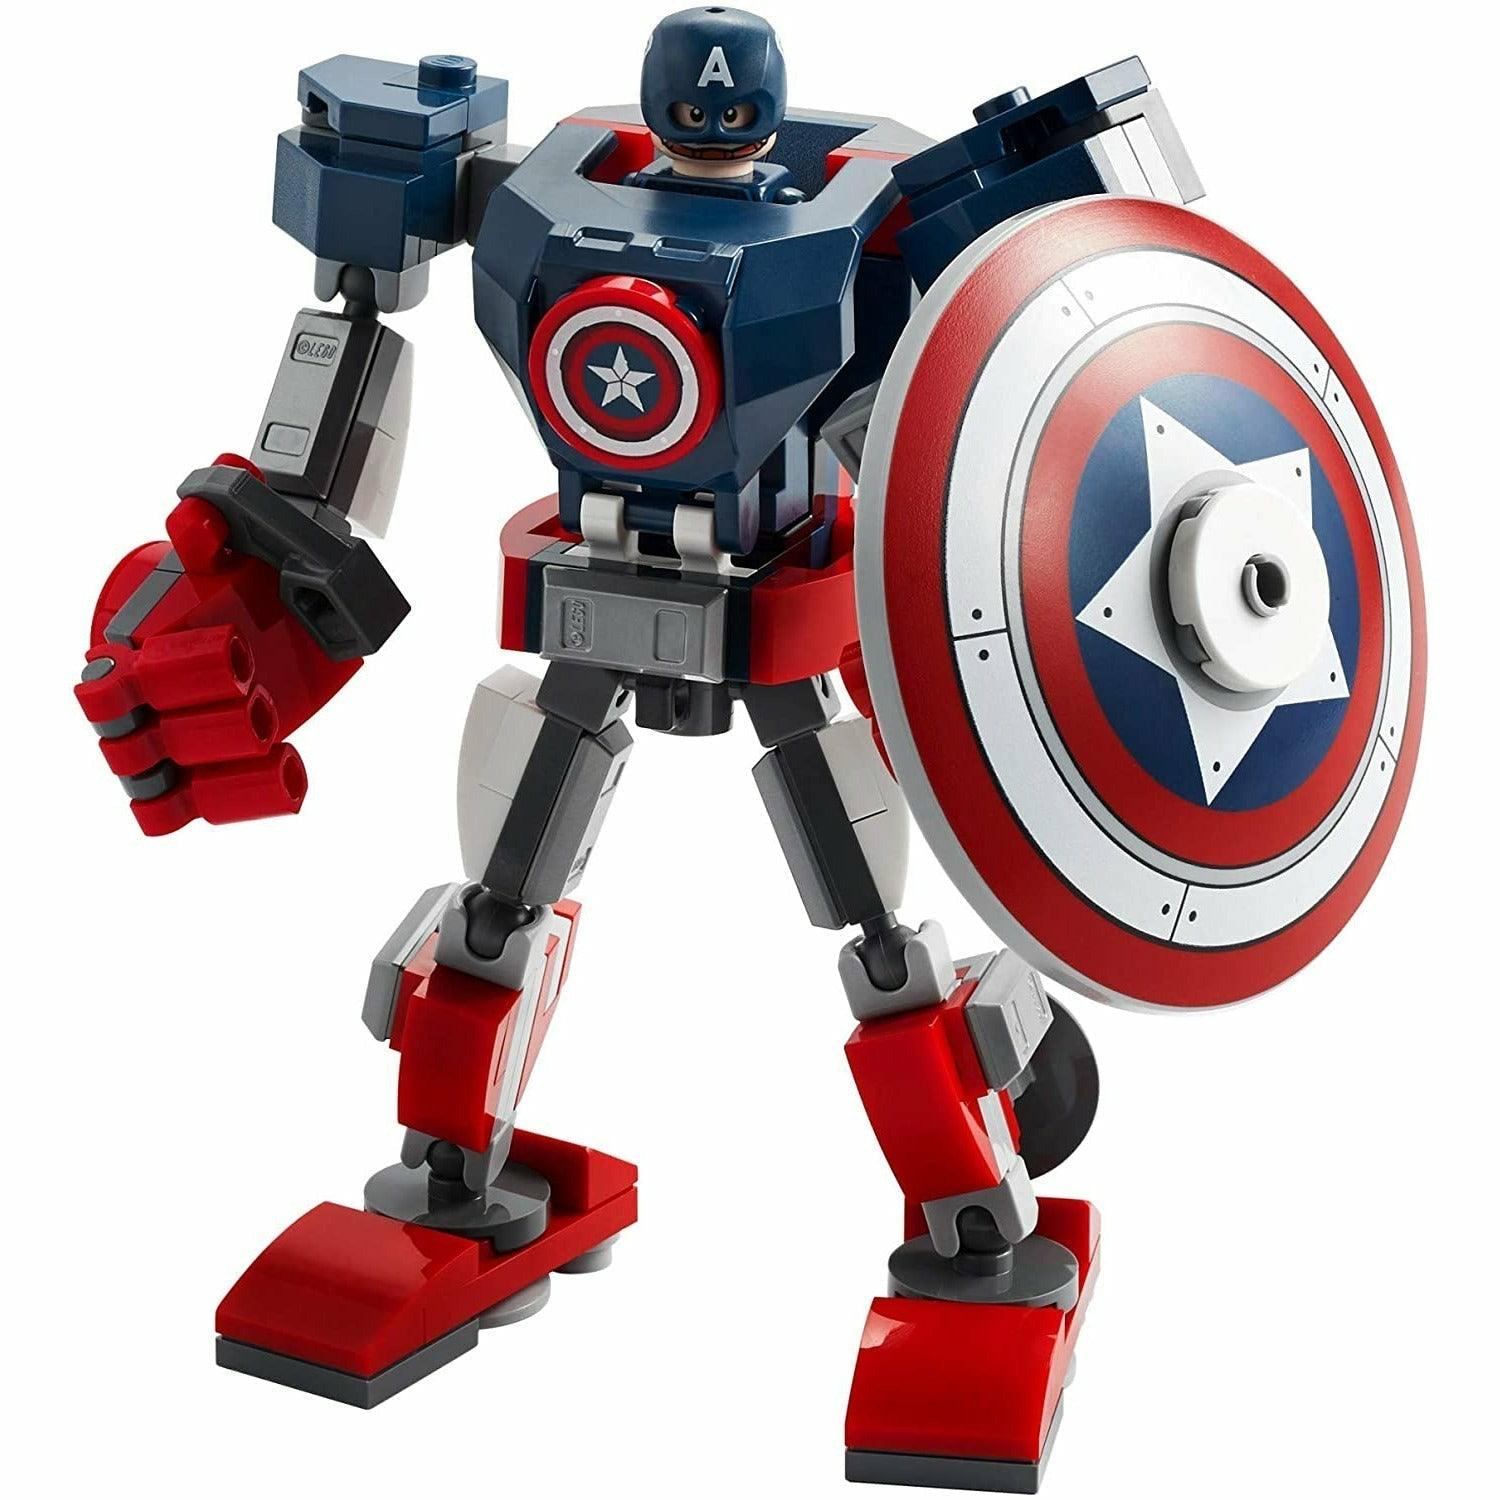 LEGO Marvel Avengers Classic Captain America Mech Armor 76168 Collectible Captain America Shield Building Toy, New 2021 (121 Pieces) - BumbleToys - 6+ Years, Action Figures, Avengers, Boys, Captain America, Figures, LEGO, Marvel, OXE, Pre-Order